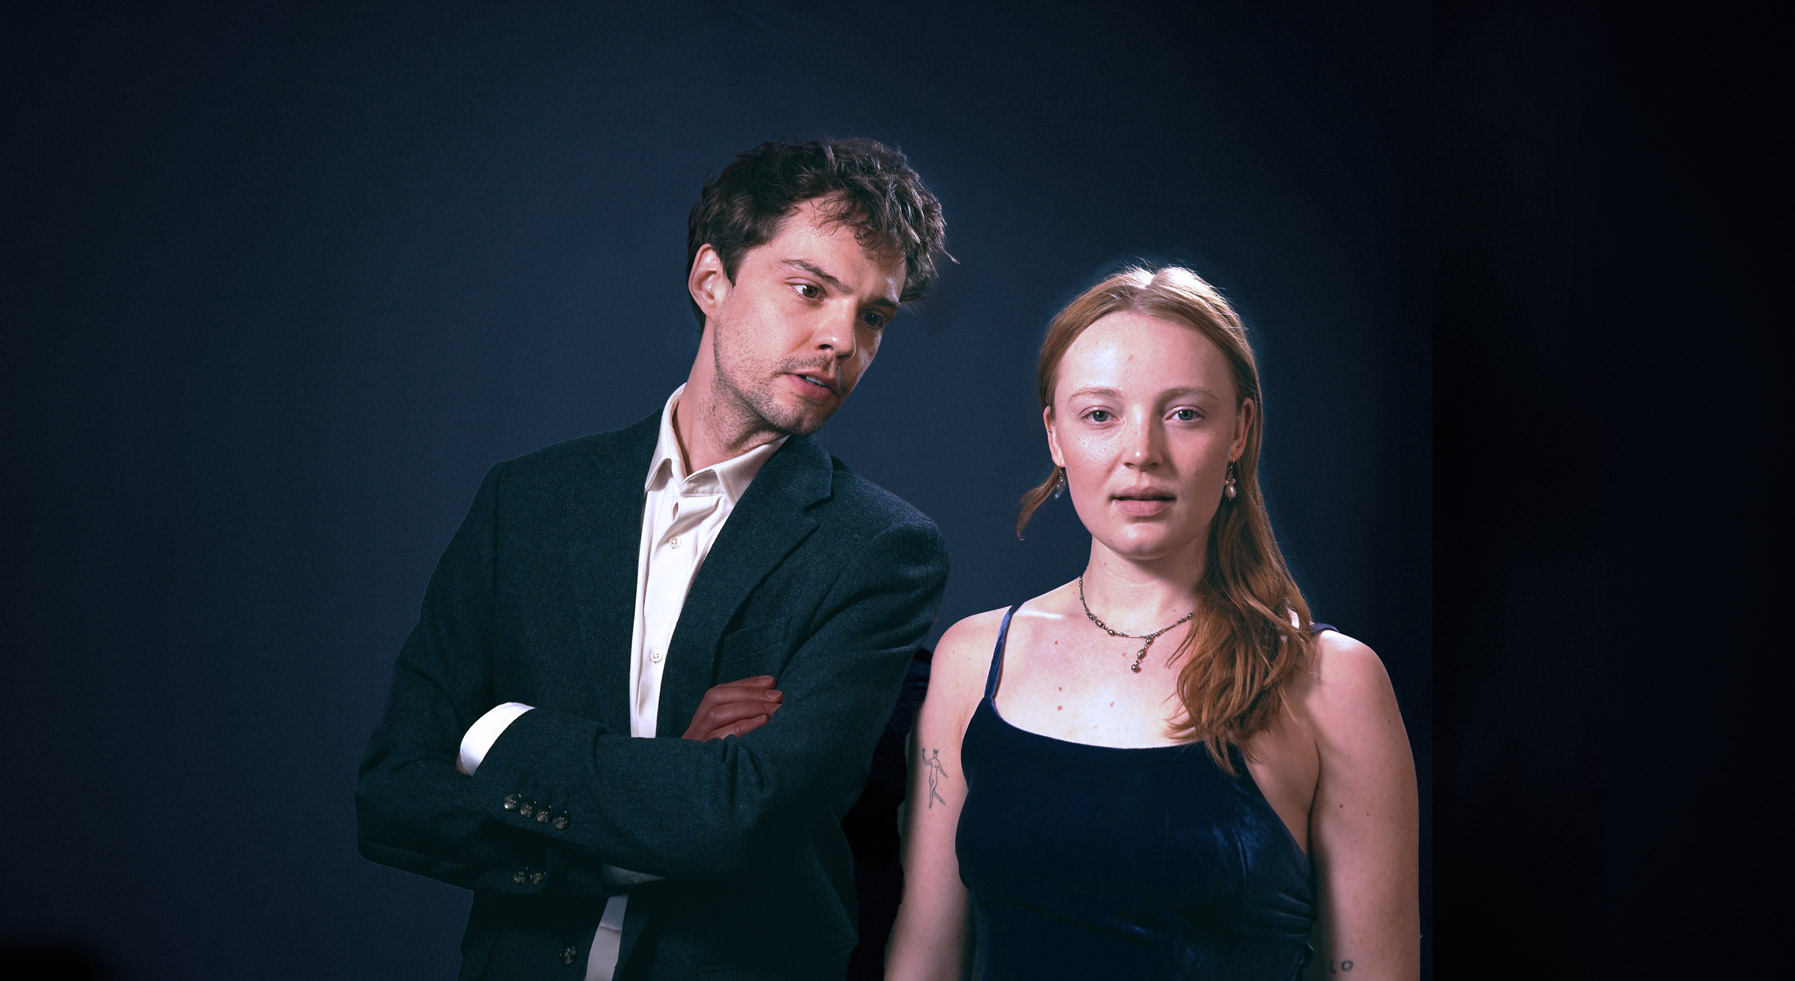 The duo "Mood Indigo" comprised of Tom Blake and Alice Pryor stand next to each other. Alice looks directly at camera while Tom looks slightly off to side.